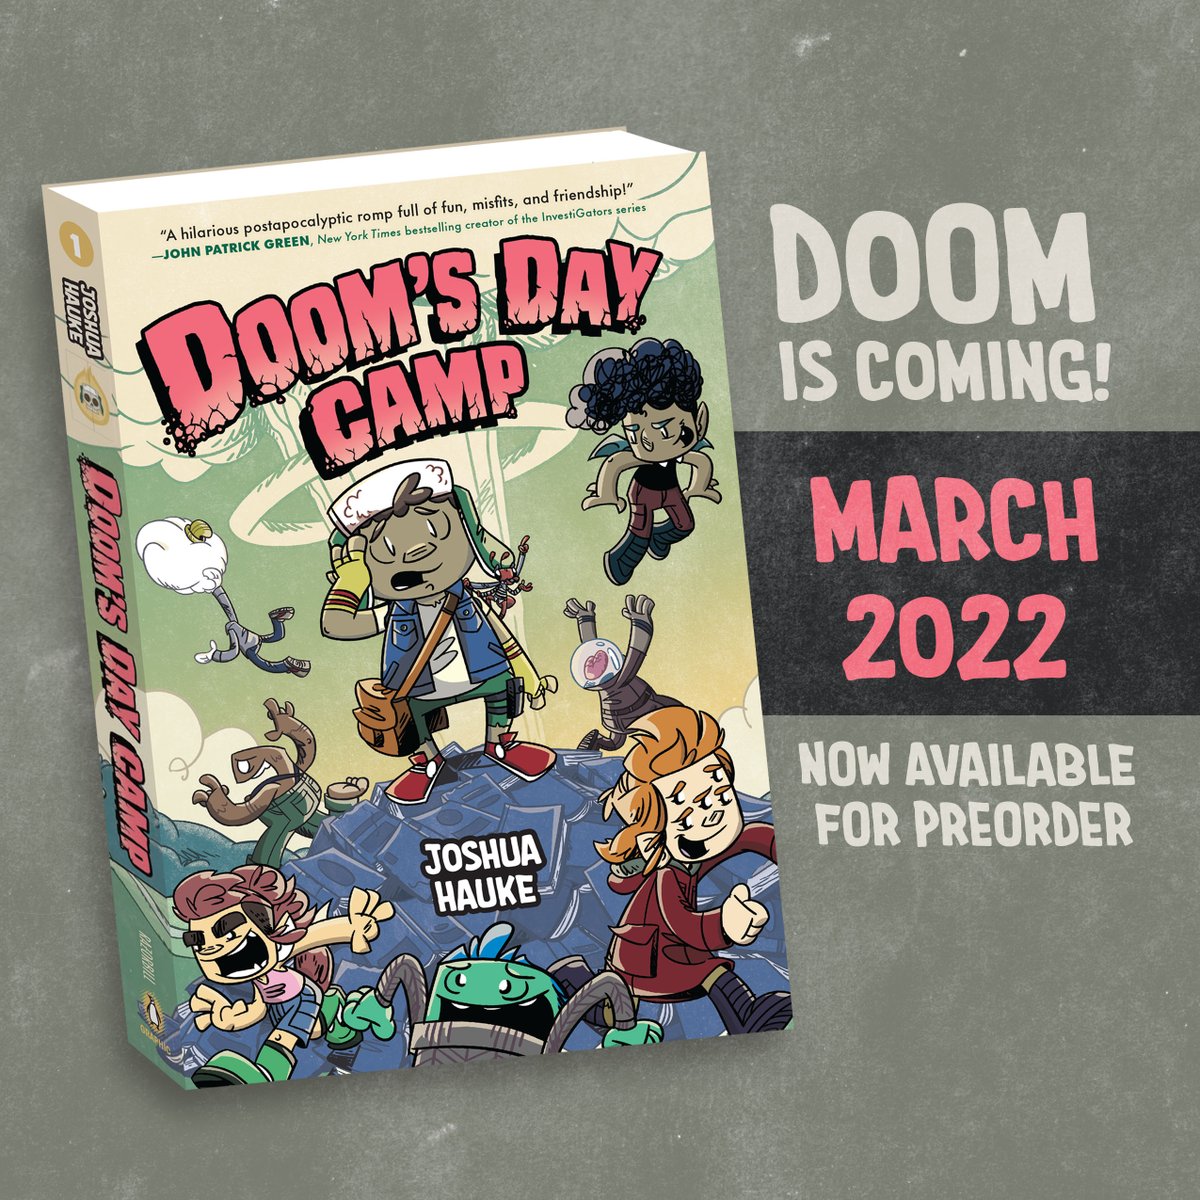 The cover for DOOM’S DAY CAMP is officially out! I really can’t wait for you all to see it. So, please tell your friends, tell your neighbors, tell your neighbor's dog, and preorder it today. #doomsdaycamp #razorbill #graphicnovelsforkids #graphicnovel #preorder